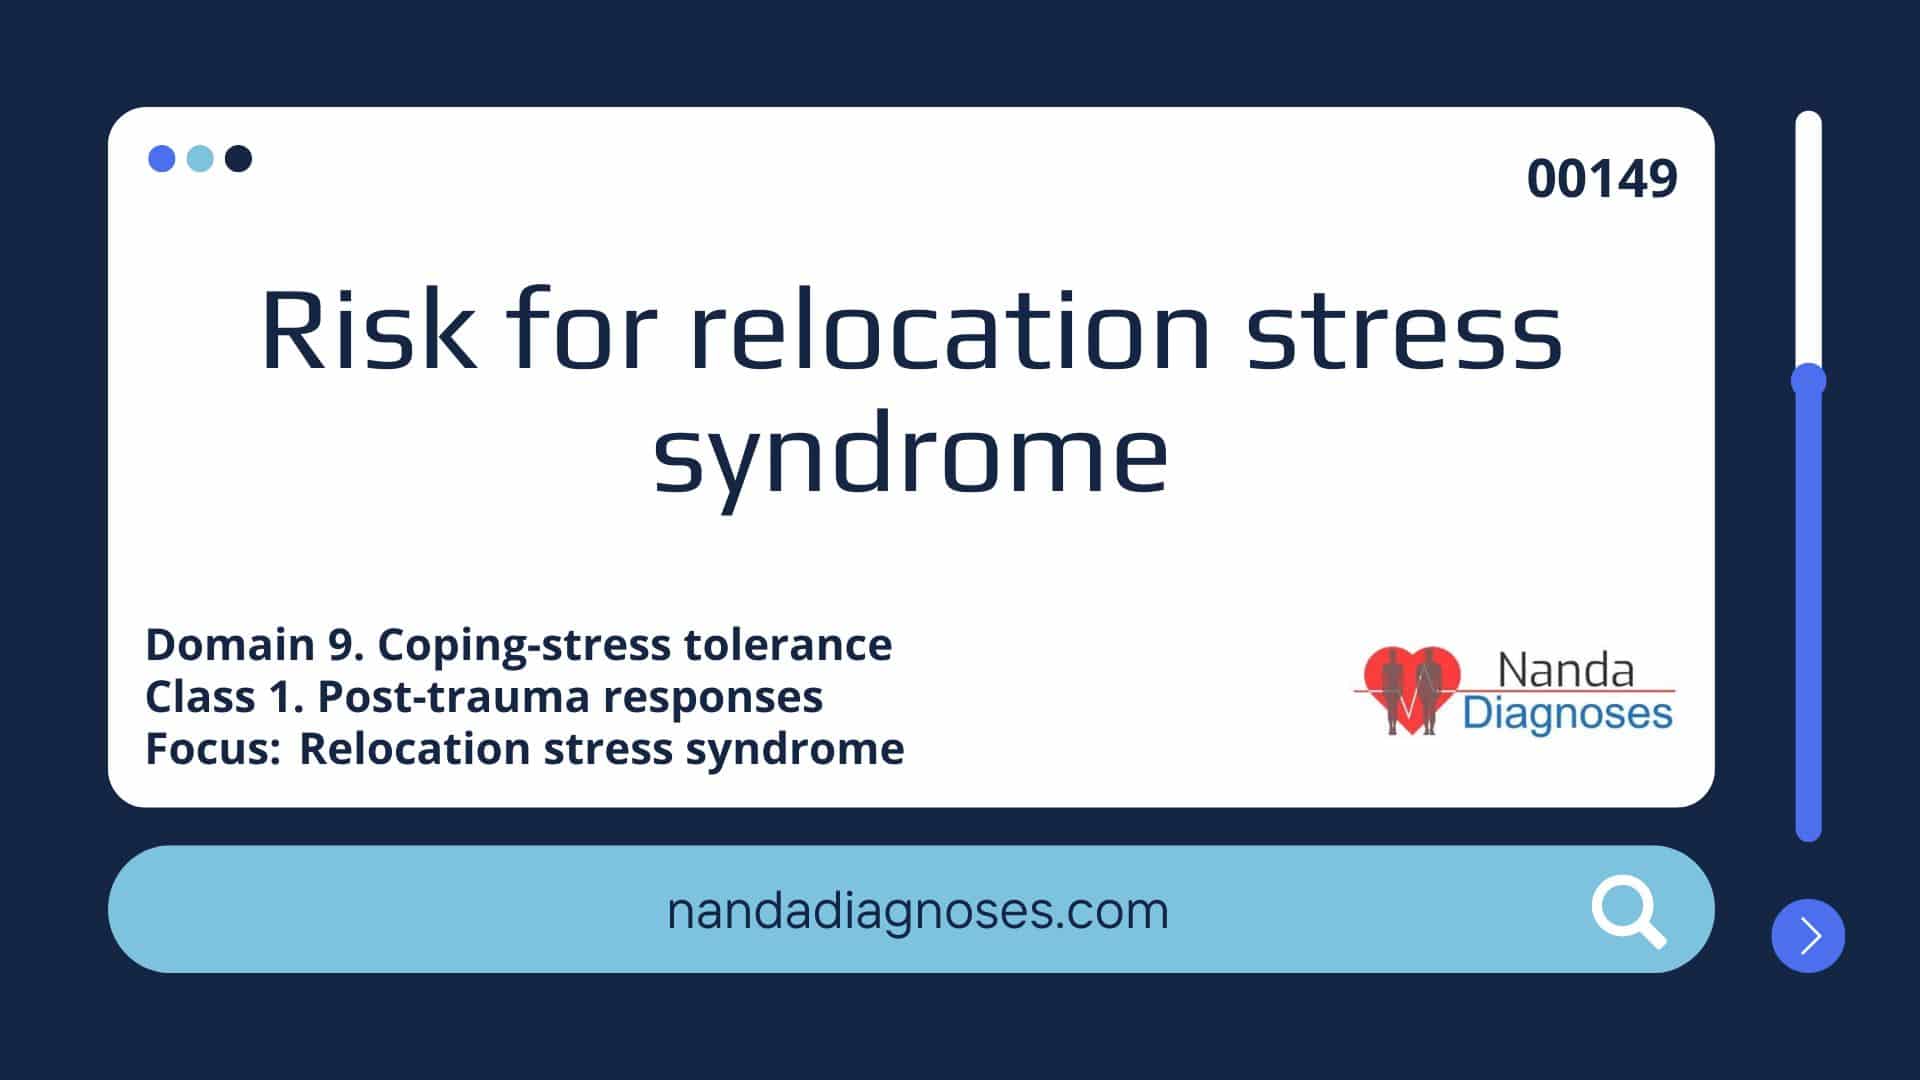 Risk for relocation stress syndrome